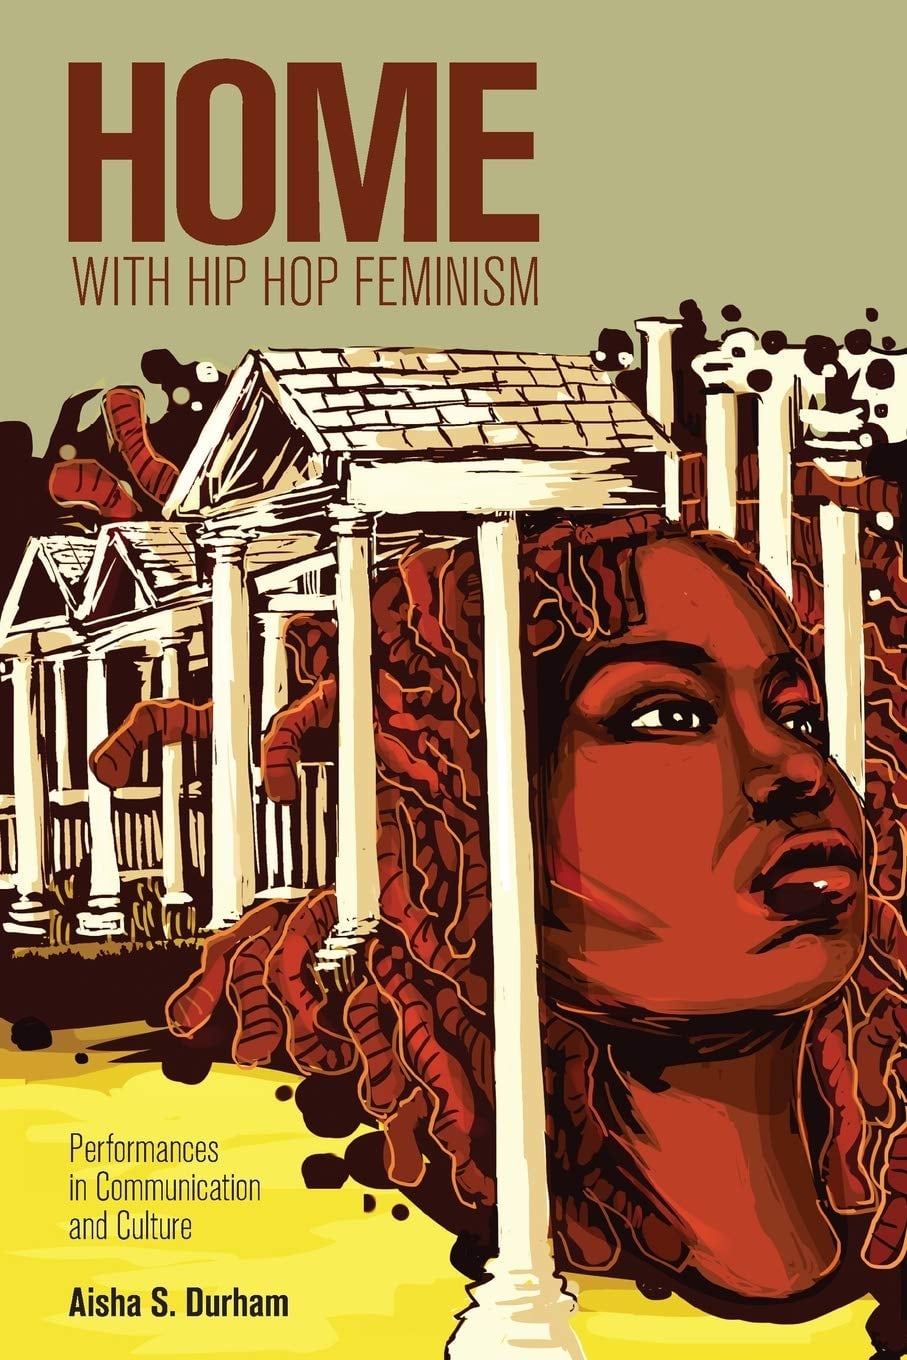 <p><a href="https://www.amazon.com/Home-Feminism-Communication-Intersections-Communications/dp/1433107090/ref=sr_1_1?crid=27N18F6714ZVU&keywords=%22Home+With+Hip-Hop+Feminism%3A+Performances+in+Communication+and+Culture%22&qid=1690414962&s=books&sprefix=home+with+hip-hop+feminism+performances+in+communication+and+culture+%2Cstripbooks%2C156&sr=1-1">BUY NOW</a></p><p>$30</p><p><strong><a href="https://www.amazon.com/Home-Feminism-Communication-Intersections-Communications/dp/1433107090/ref=sr_1_1?crid=27N18F6714ZVU&keywords=%22Home+With+Hip-Hop+Feminism%3A+Performances+in+Communication+and+Culture%22&qid=1690414962&s=books&sprefix=home+with+hip-hop+feminism+performances+in+communication+and+culture+%2Cstripbooks%2C156&sr=1-1" class="ga-track">"Home With Hip-Hop Feminism: Performances in Communication and Culture" by Aisha S. Durham</a> ($30)</strong></p> <p>In this book, Aisha S. Durham challenges the worlds of white-dominated feminist theory, insular feminist academia, and the masculine-dominated world of hip-hop. Using a combination of autobiography and ethnography, Durham explores the history of women in hip-hop while also showing how hip-hop feminism can challenge overarching and institutionalized systems of oppression.</p>